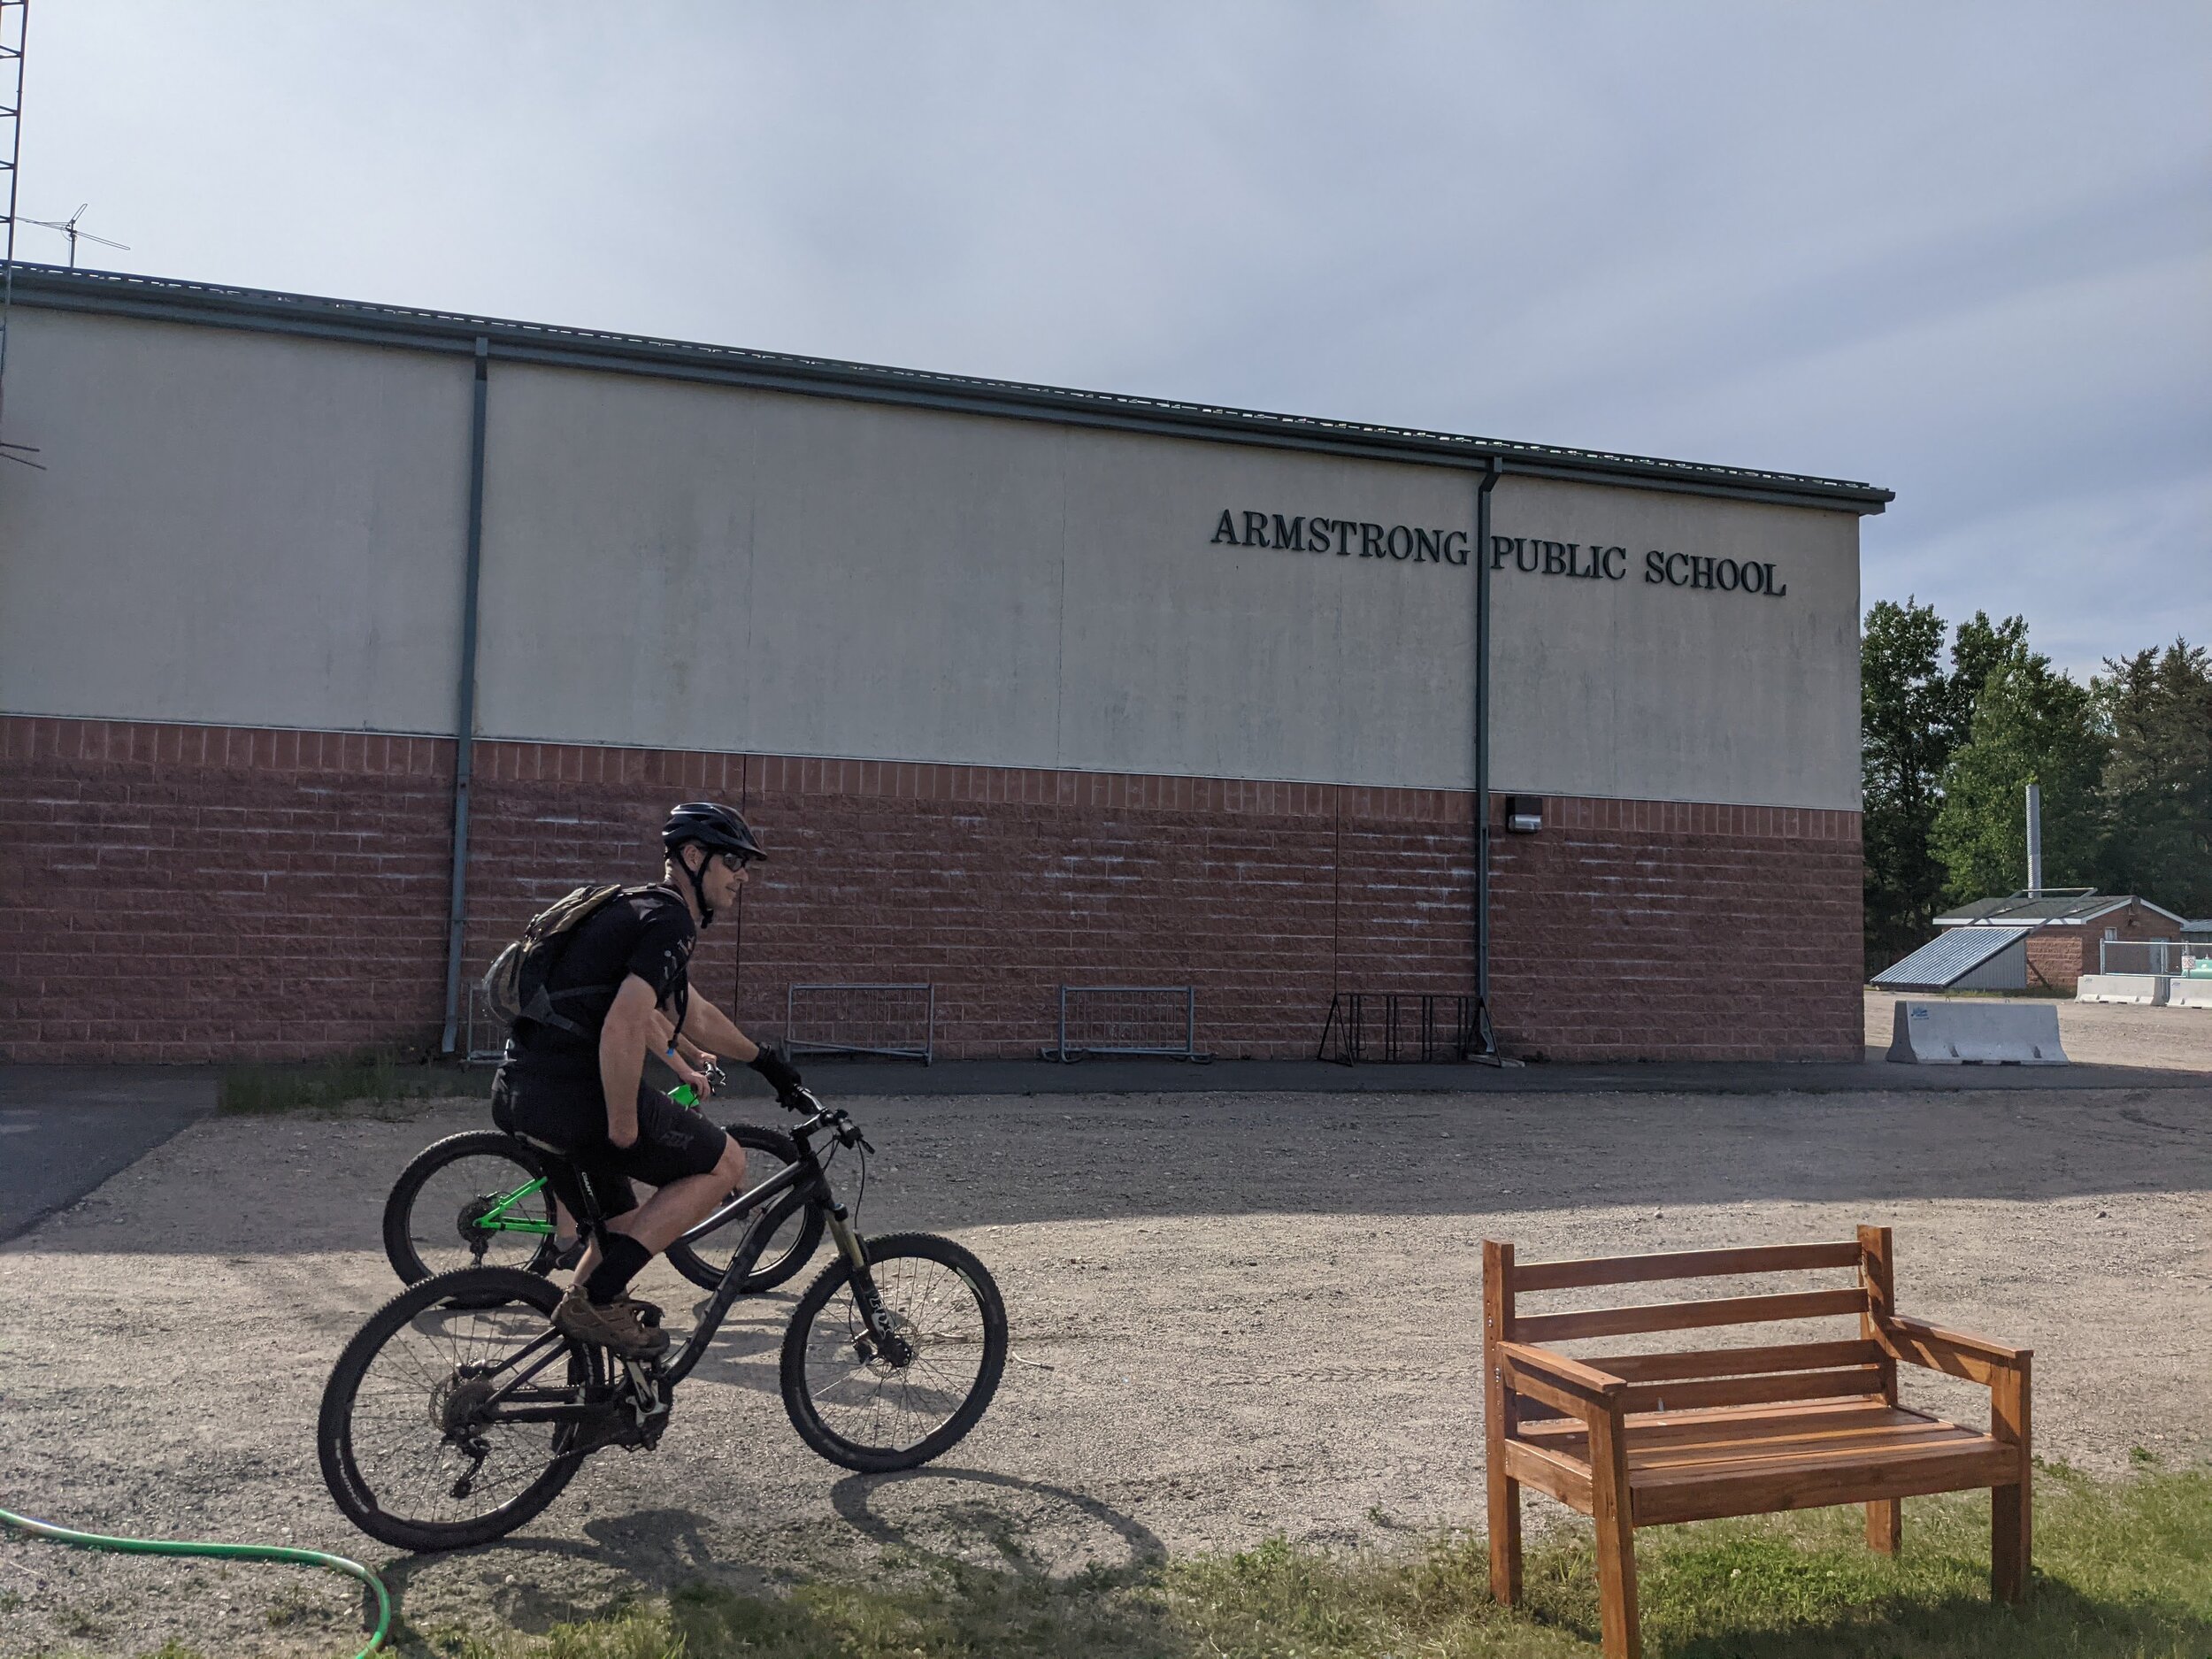 Riding past Armstrong Public School